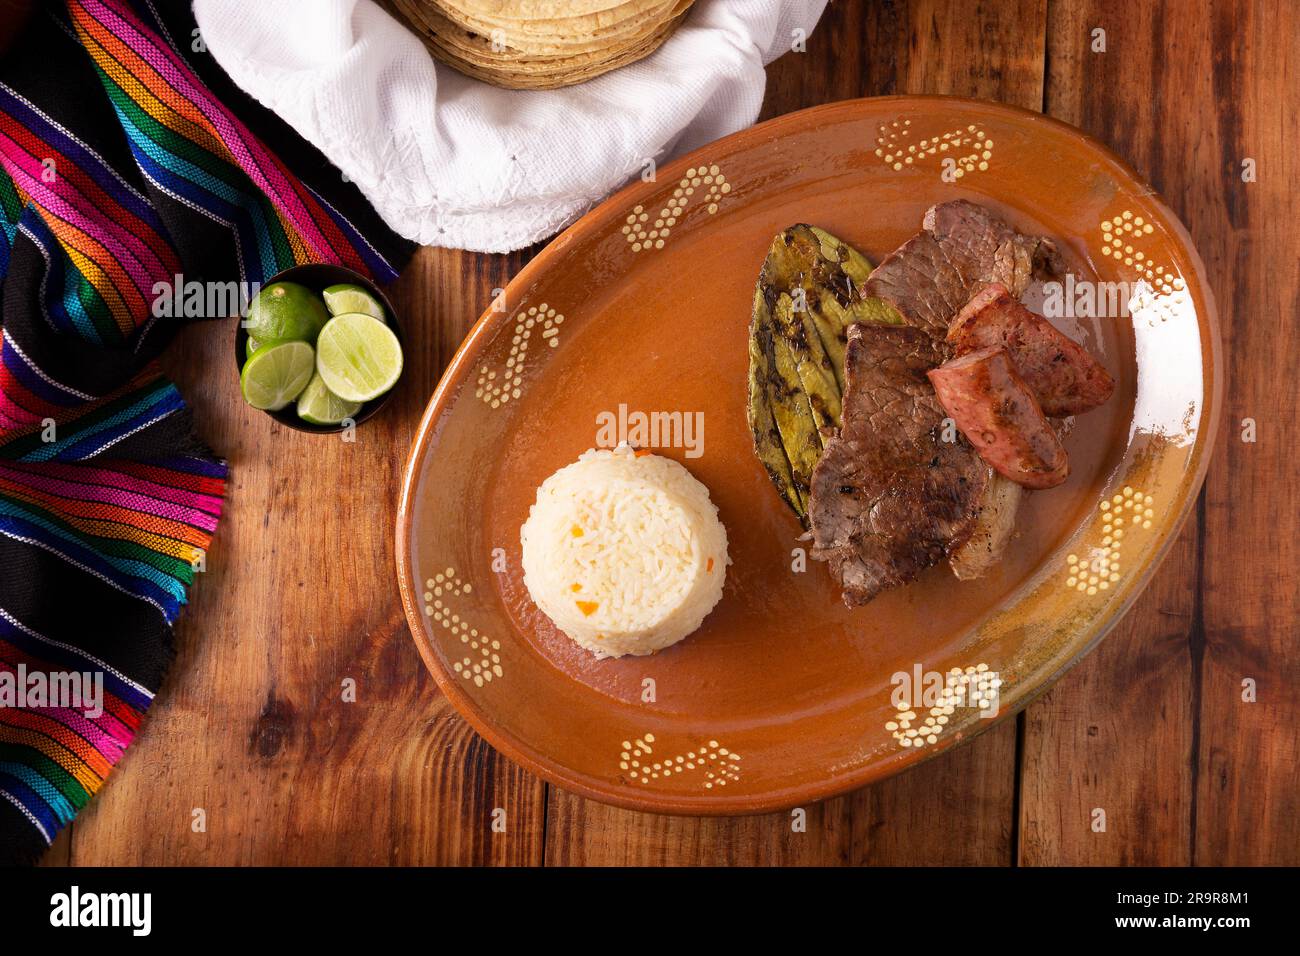 Roasted meat with roasted nopal cactus and pork sausage called chorizo, accompanied by white rice served in a typical Mexican clay plate. Stock Photo